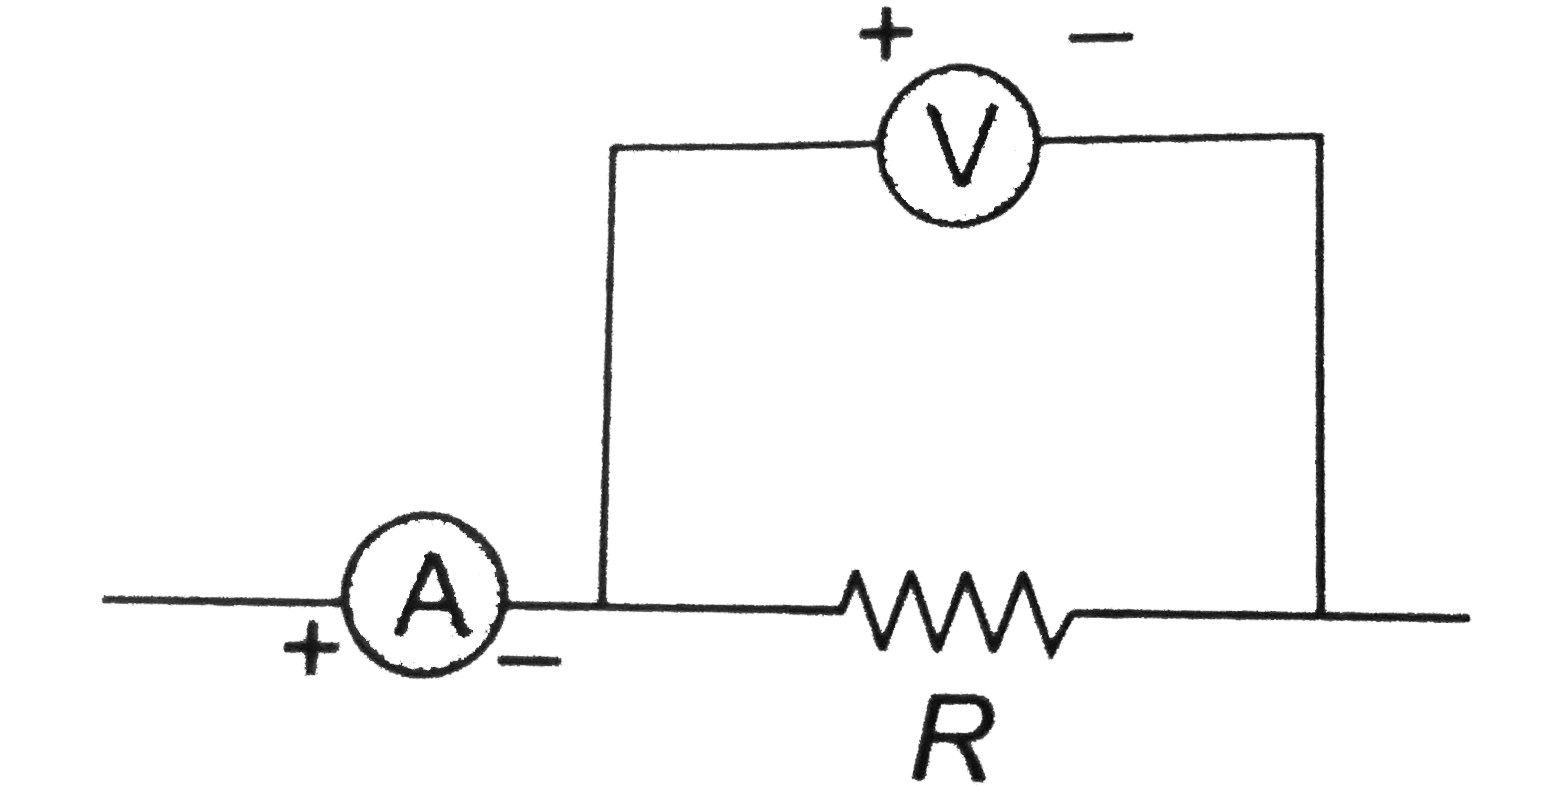 A cardidate connects a moving coil voltmeter V, a moving coil ammeter A and a resistance R as shown in figure. If the voltmeter reads 24 V and the ammeter reads 4 A, R is